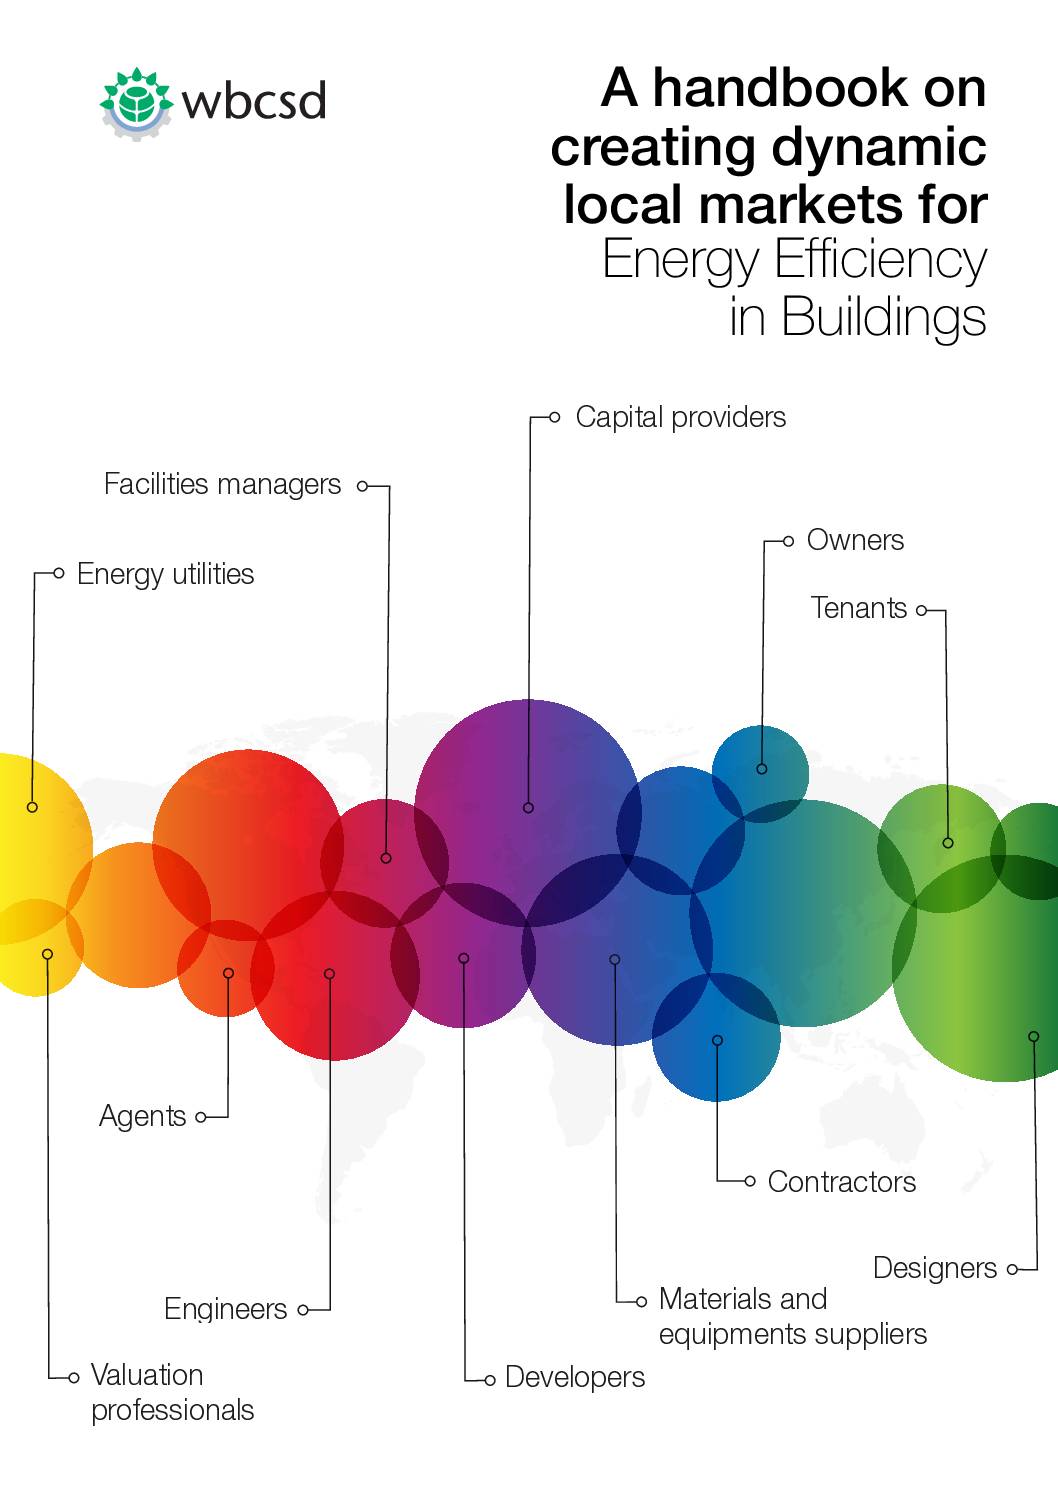 A Handbook on Creating Dynamic Local Markets for Energy Efficient Buildings